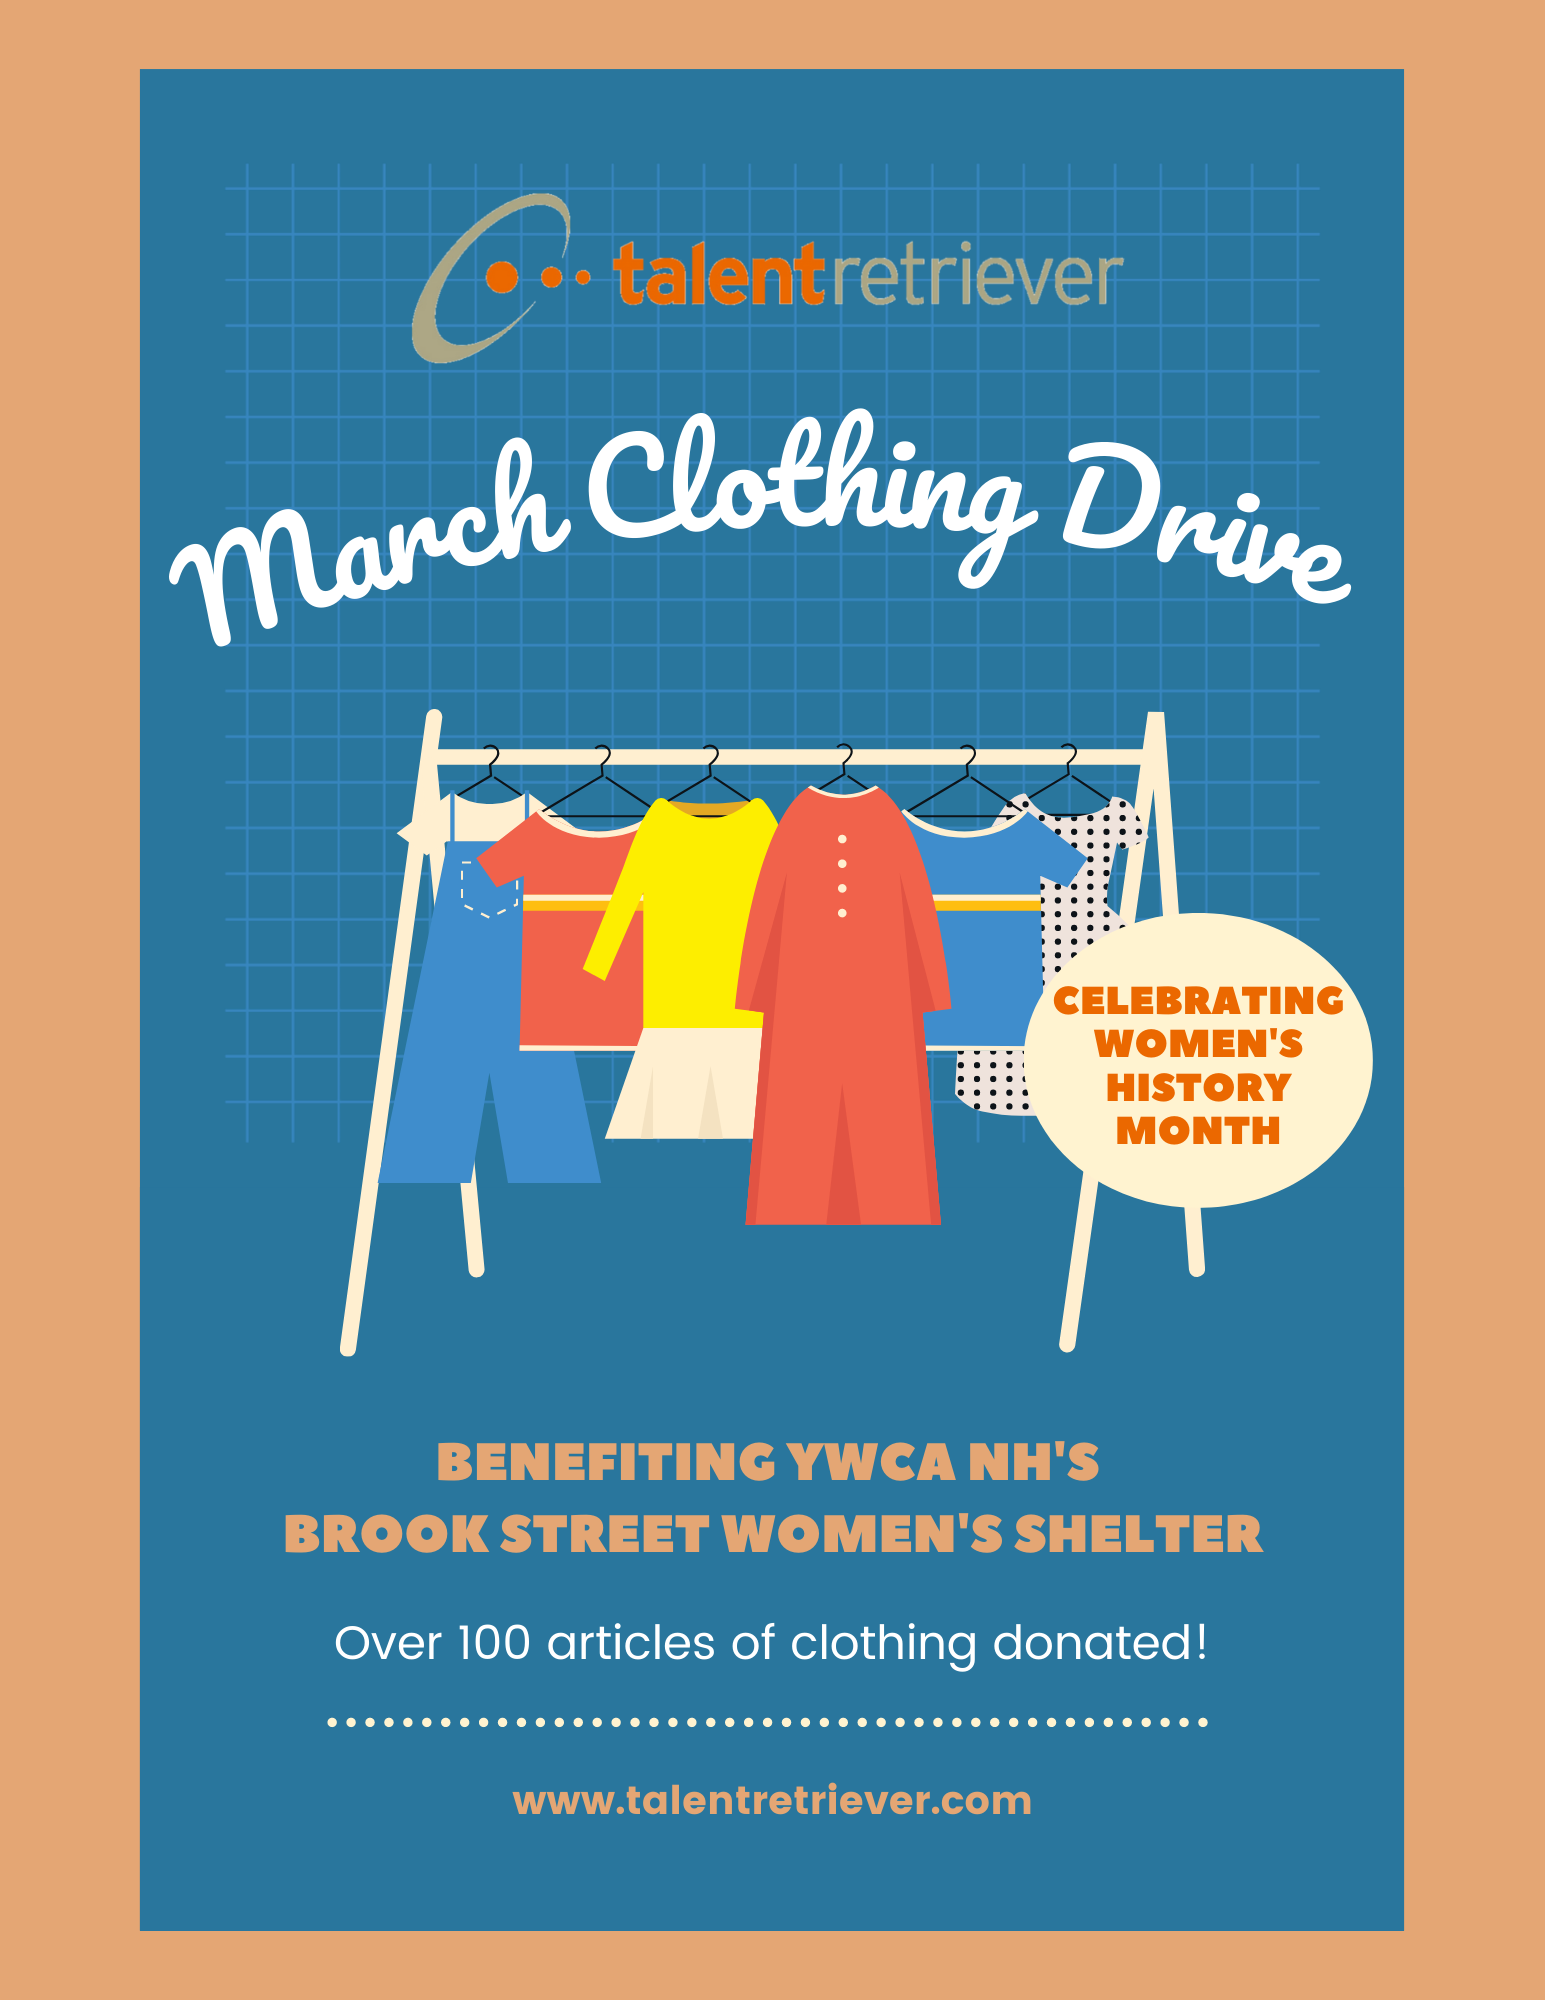 Talent Retriever Hosts a Clothing Drive; Celebrating Women’s History Month